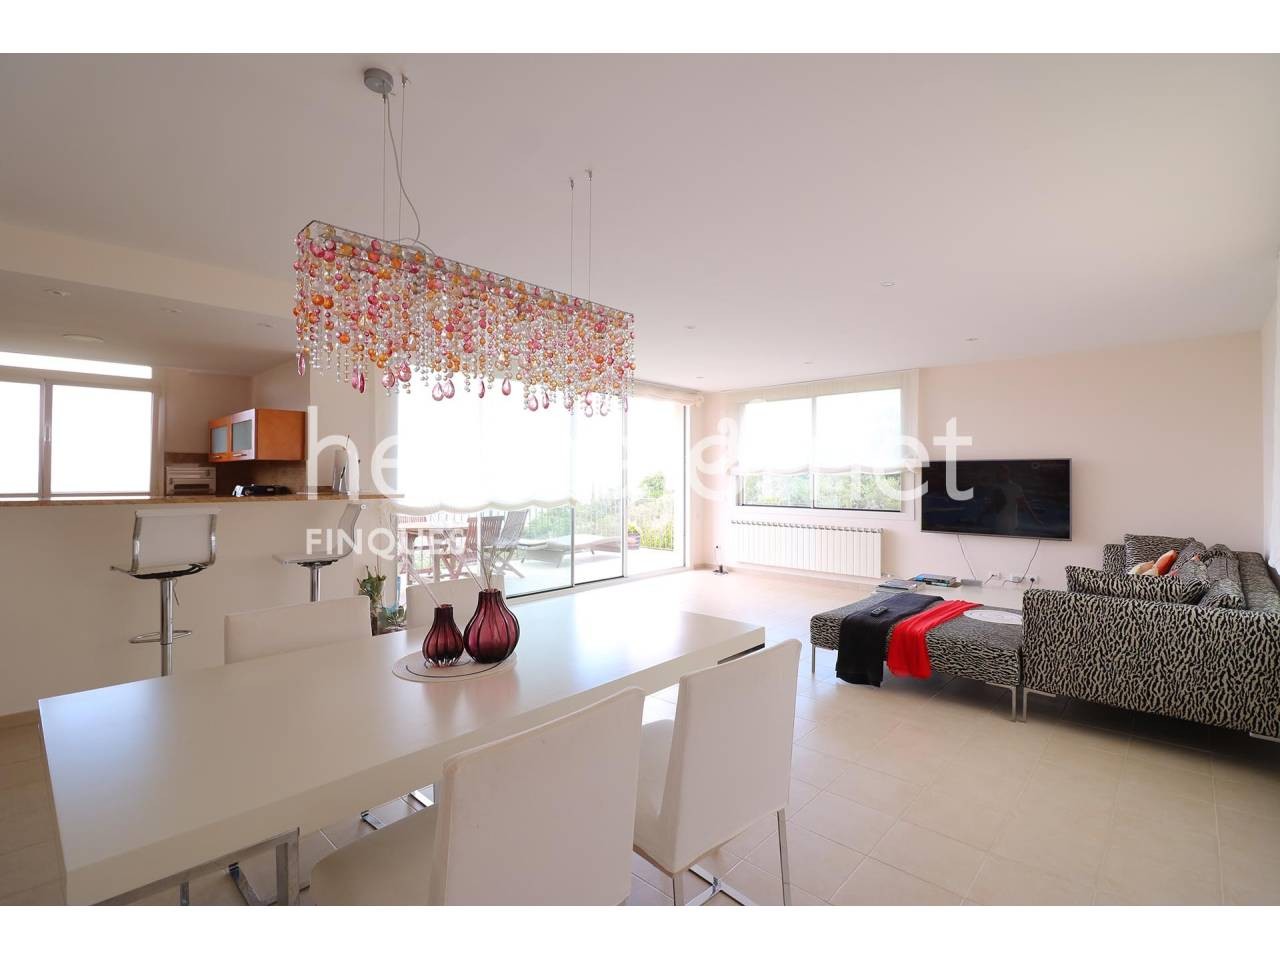 House with a beautiful garden and a pool in the Mas Nou residential area - 2376